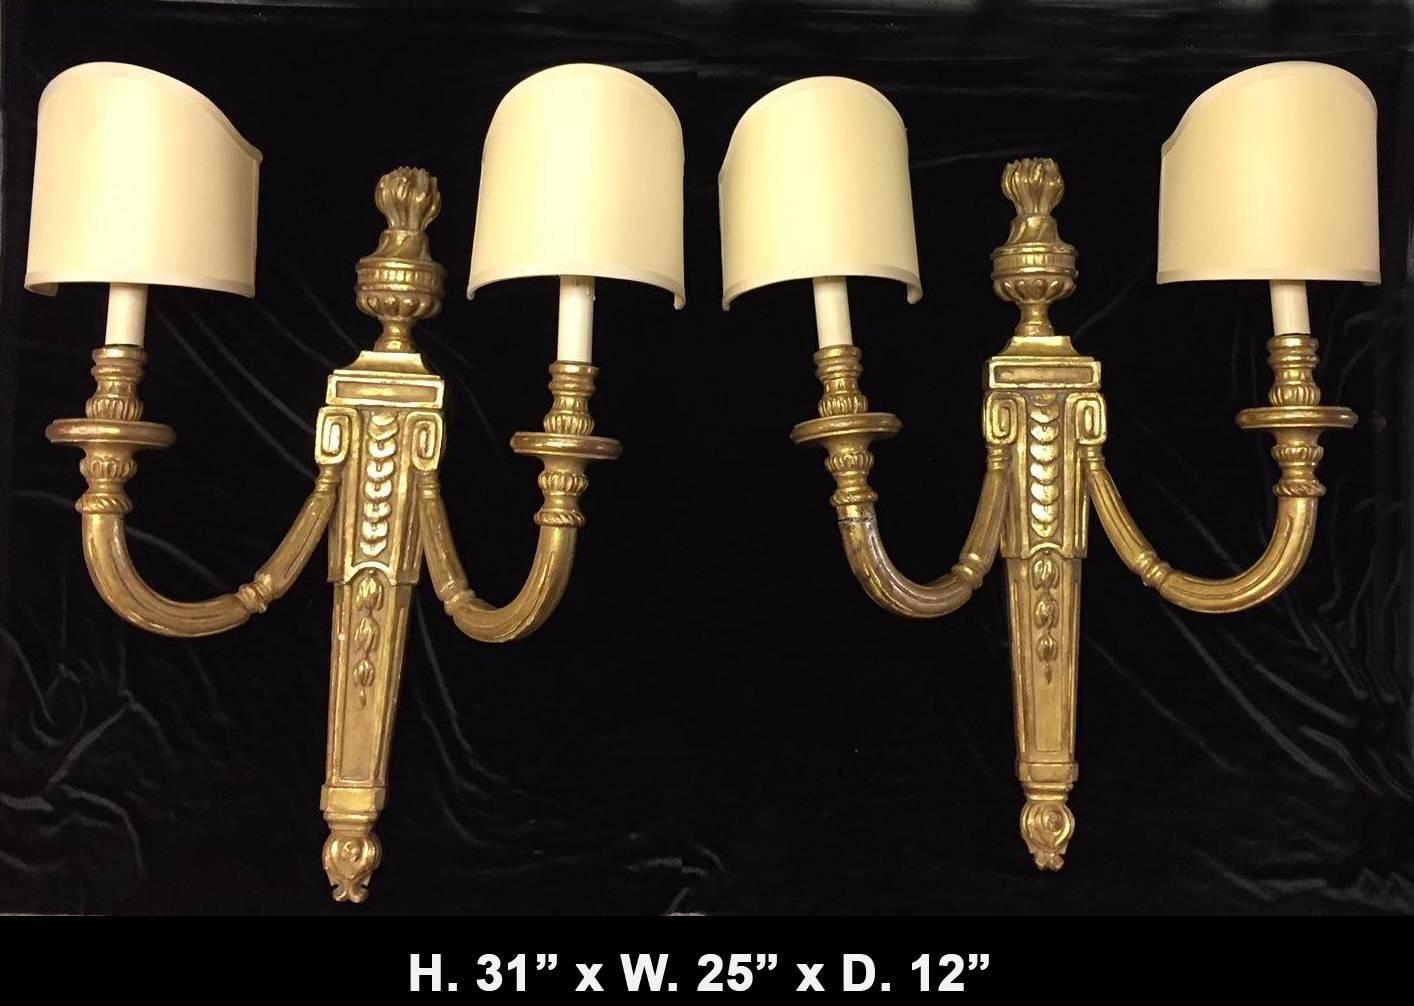 Pair of large Italian neoclassical style 22-karat gold leafed carved wood two-light sconces with flamed urn finials and large curved silk shades.

Overall Dimensions are listed below include the shades.